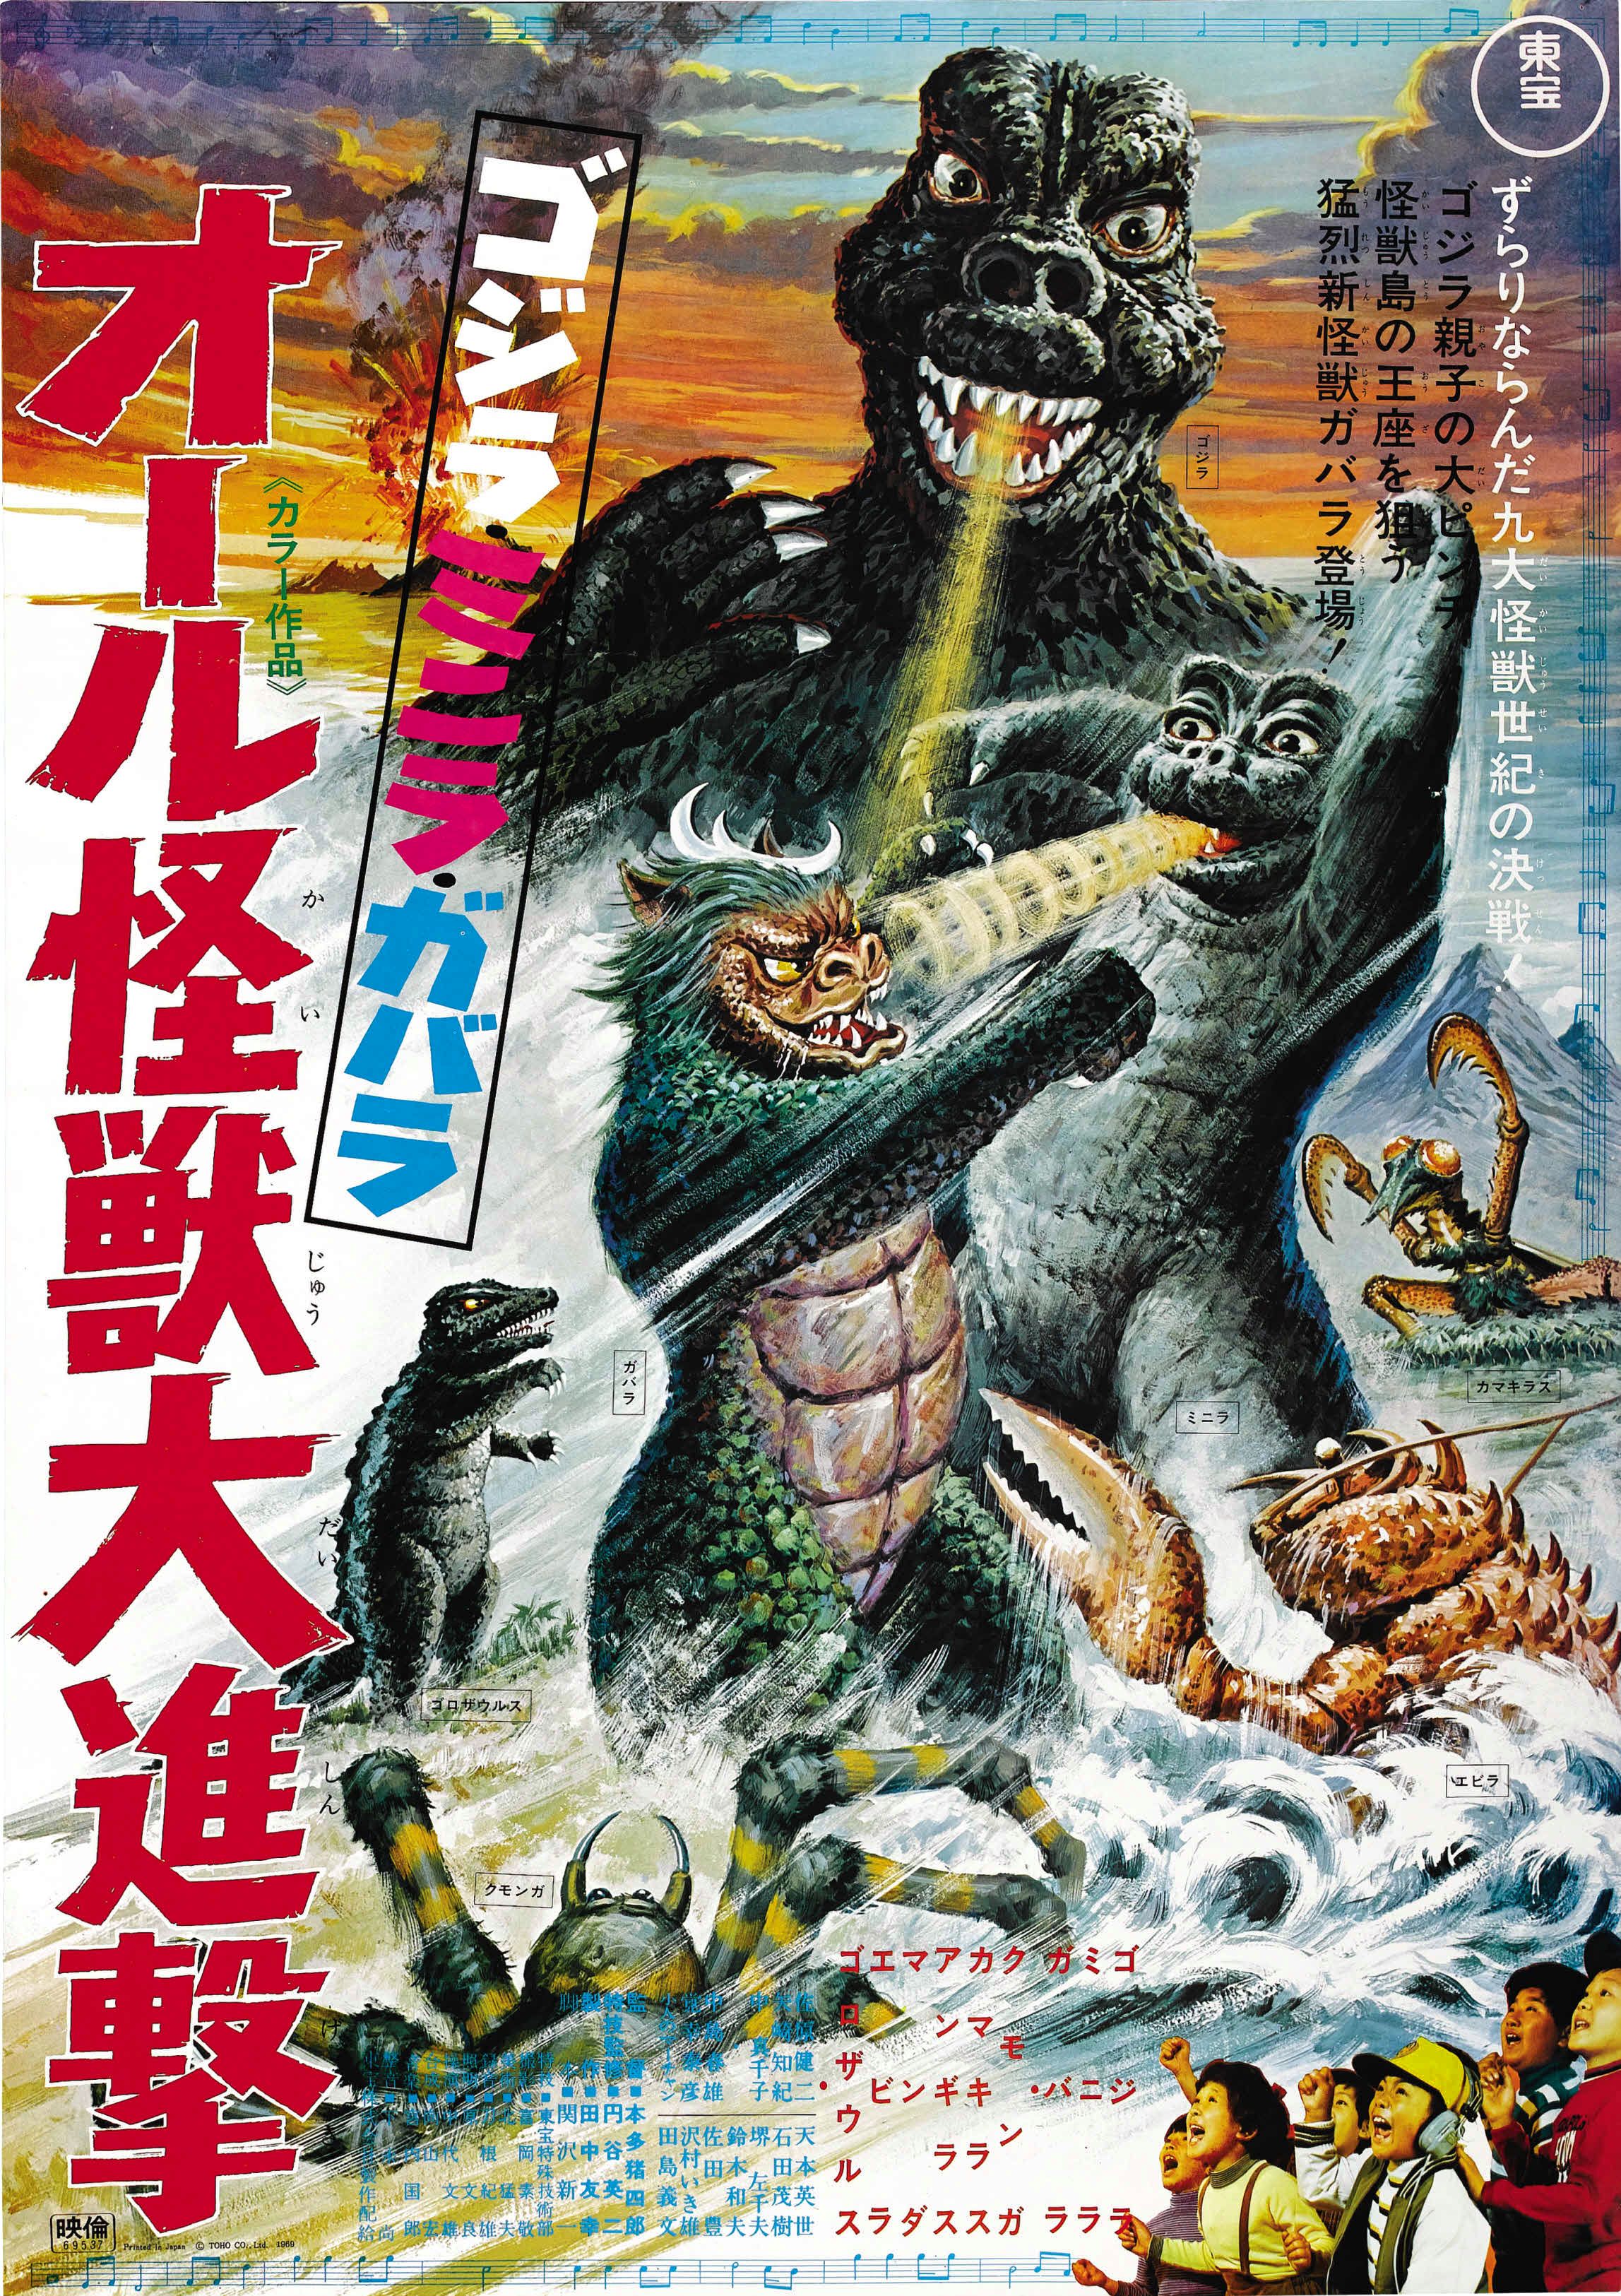 Kaiju News Outlet on X: I don't speak Spanish, (at least not